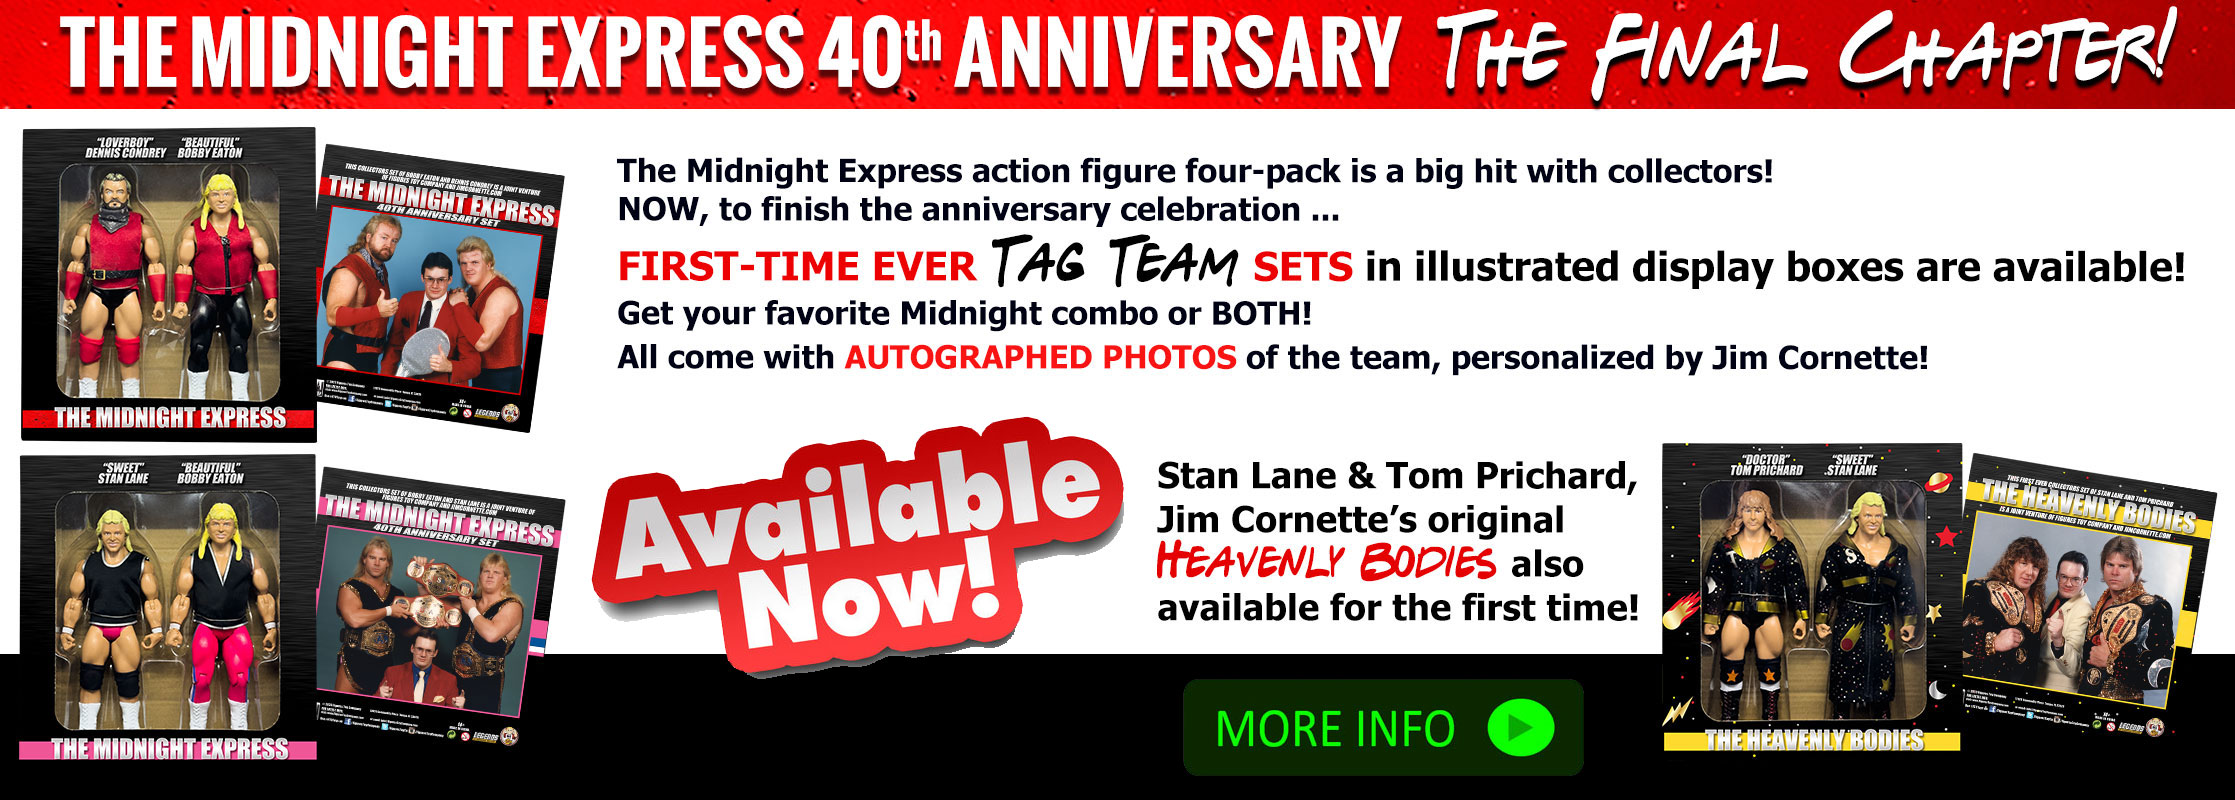 The Midnight Express Tag Team Action Figures with Jim Cornette